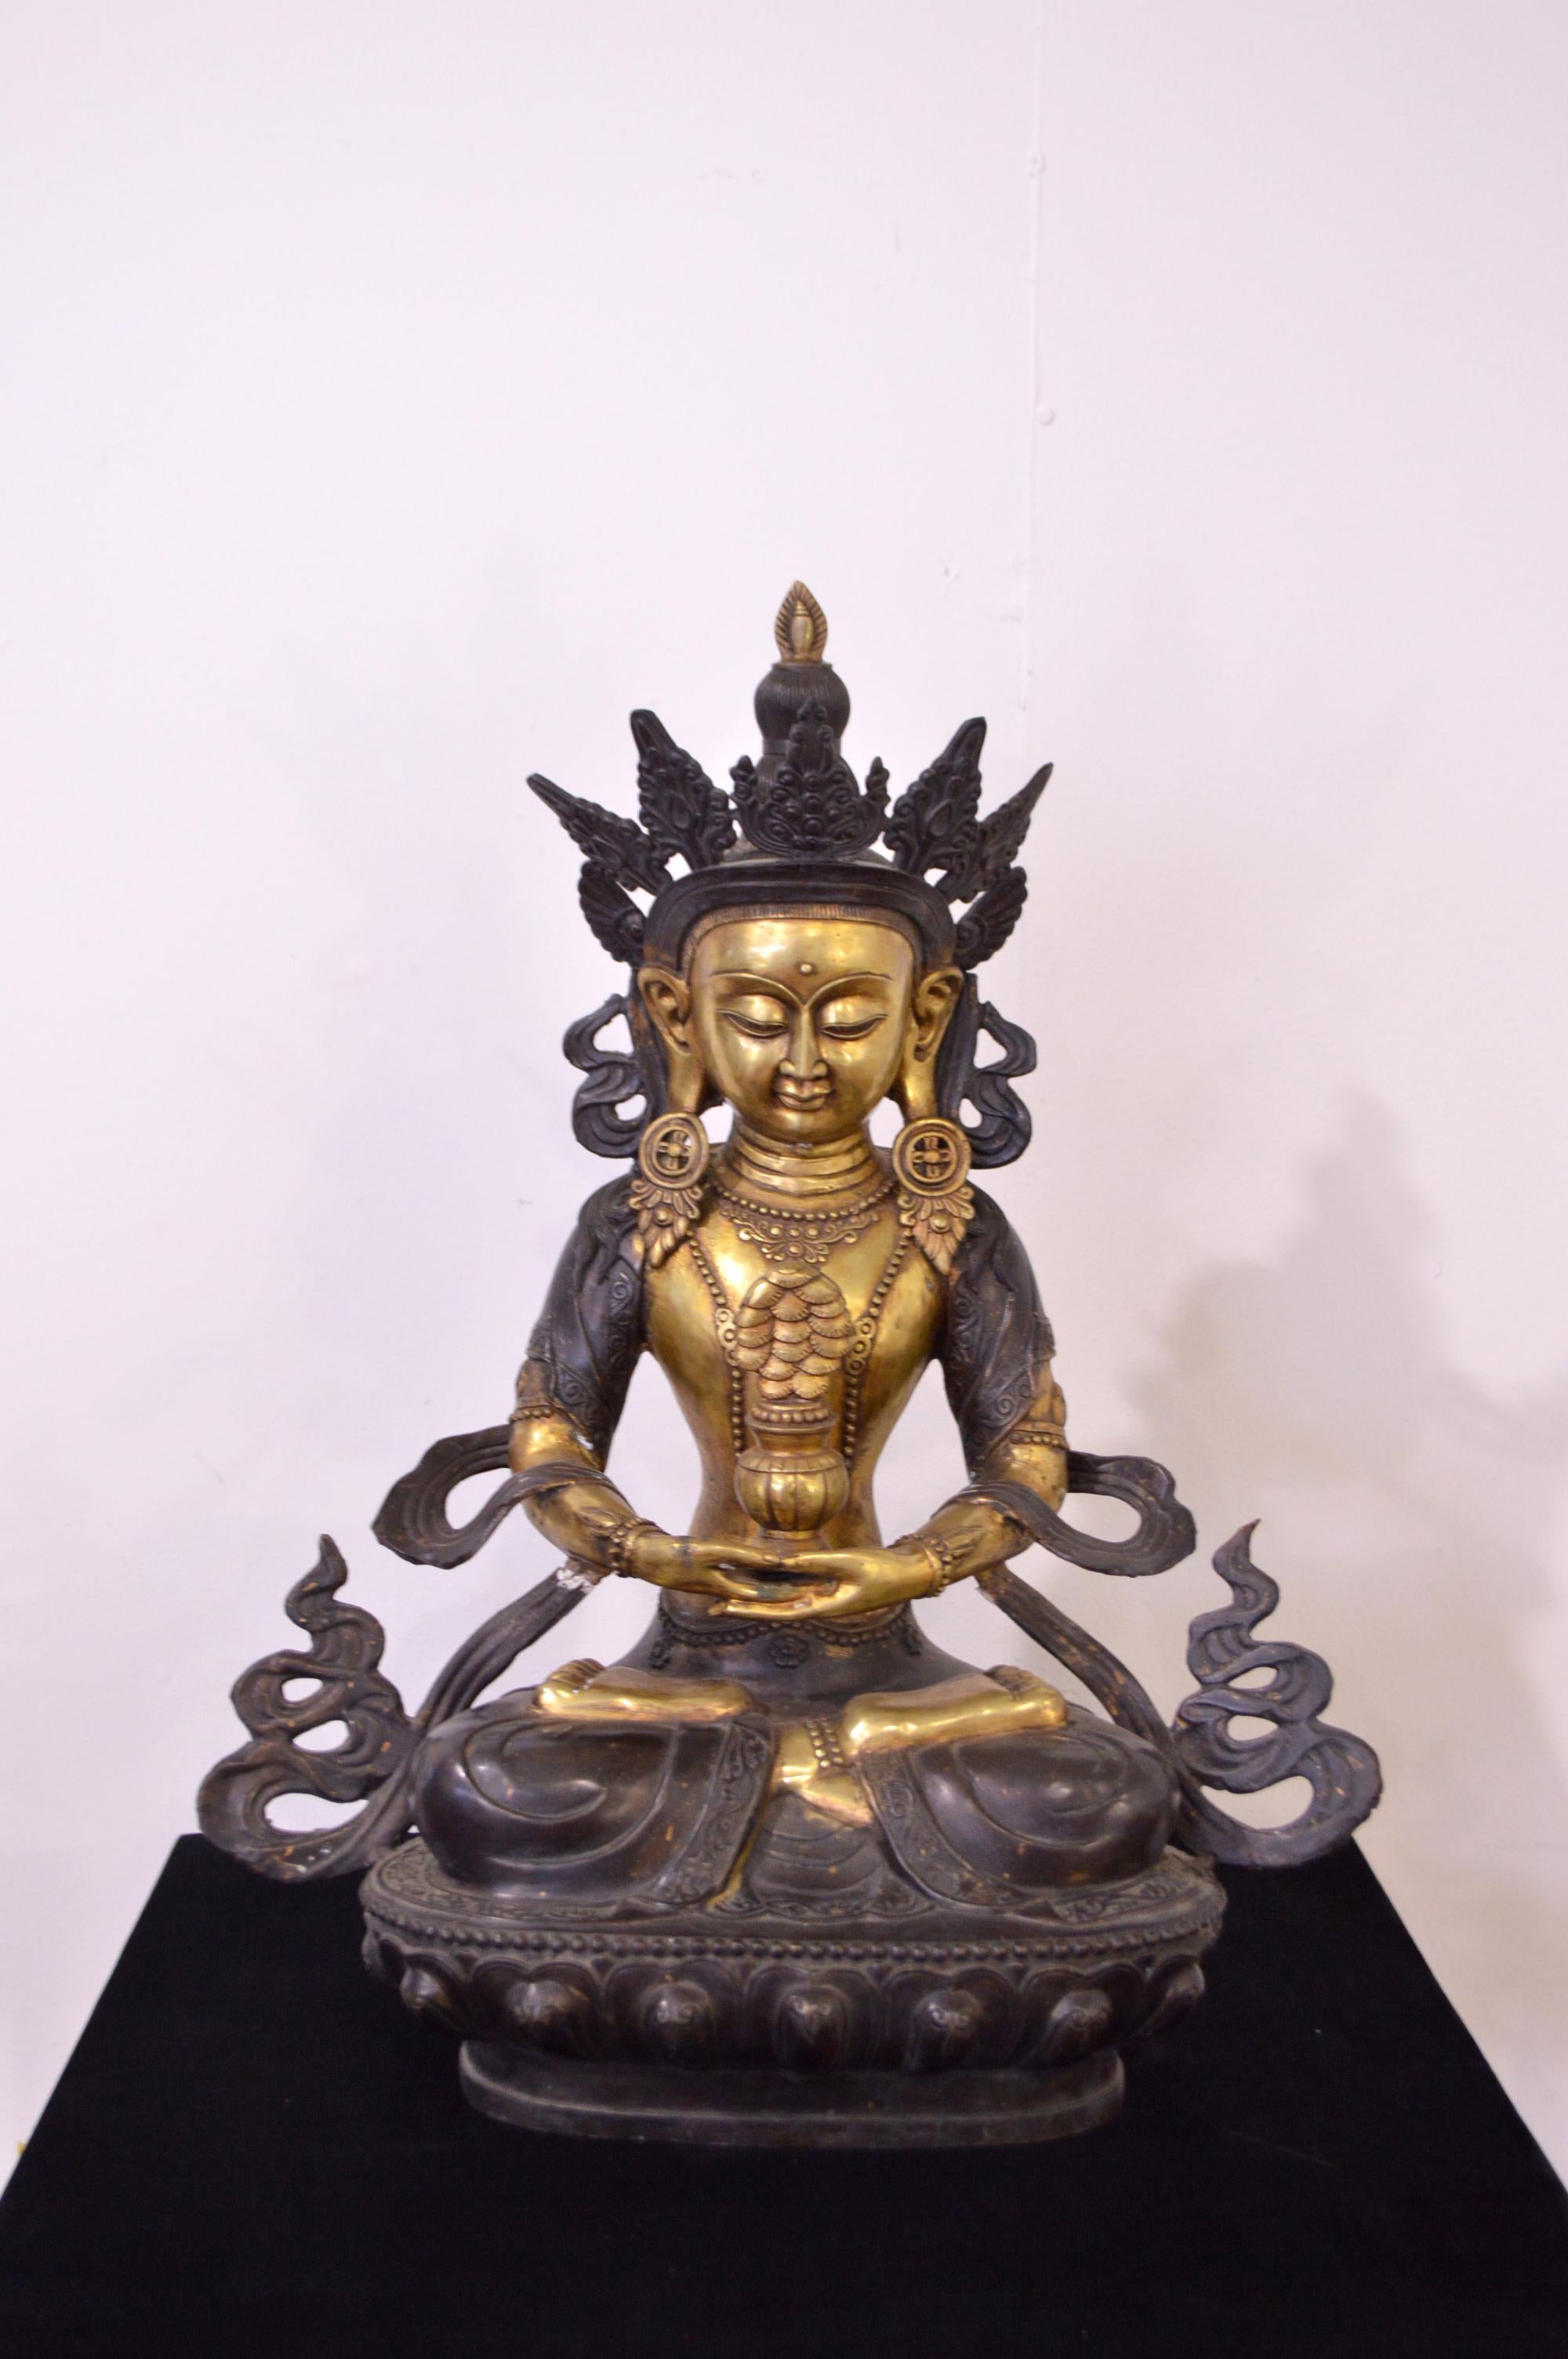 Massive bronze statue weighing almost 20 kg. Tara is considered the mother of all Buddhas, represents the feminine energy. In Tibetan Buddhism, Tara symbolizes divinity in her feminine aspect. According to tradition, Tara was born of a tear of